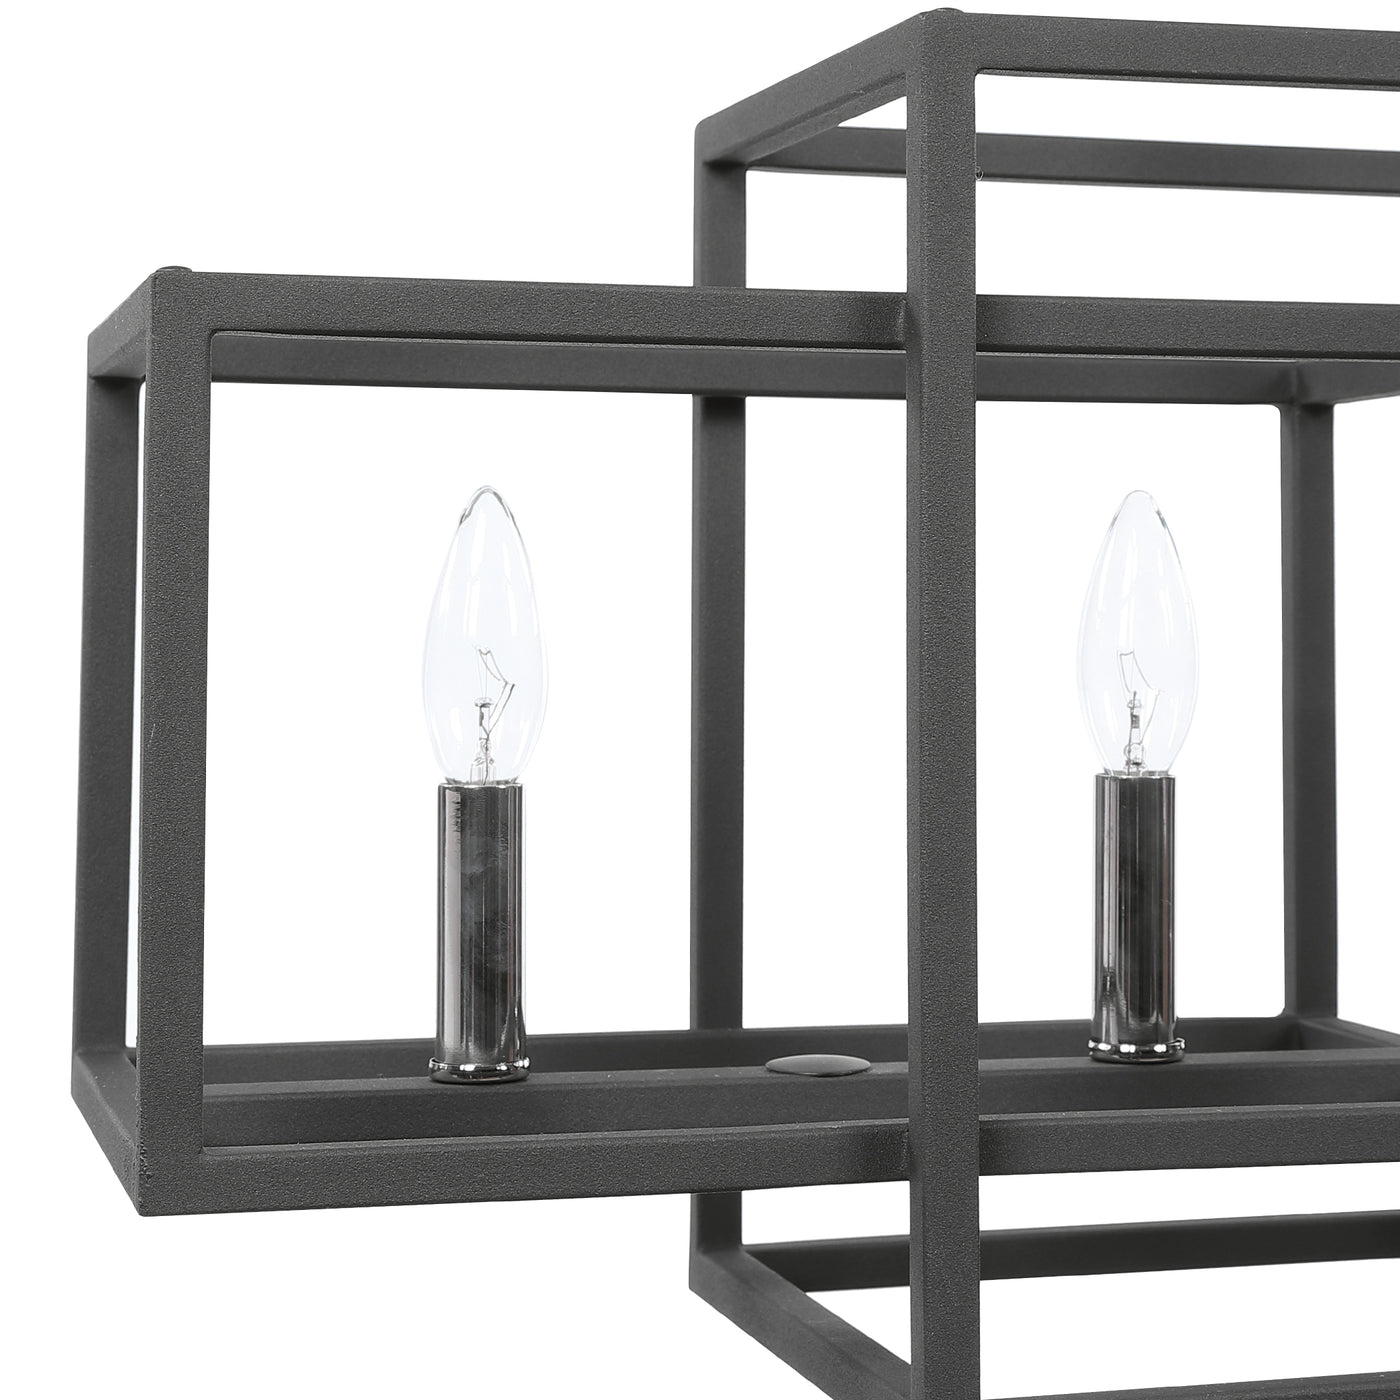 Clean Rectangles In A Sanded Black Texture Finish With Polished Nickel Accents Complete This 6 Lt. Linear Chandelier. With...